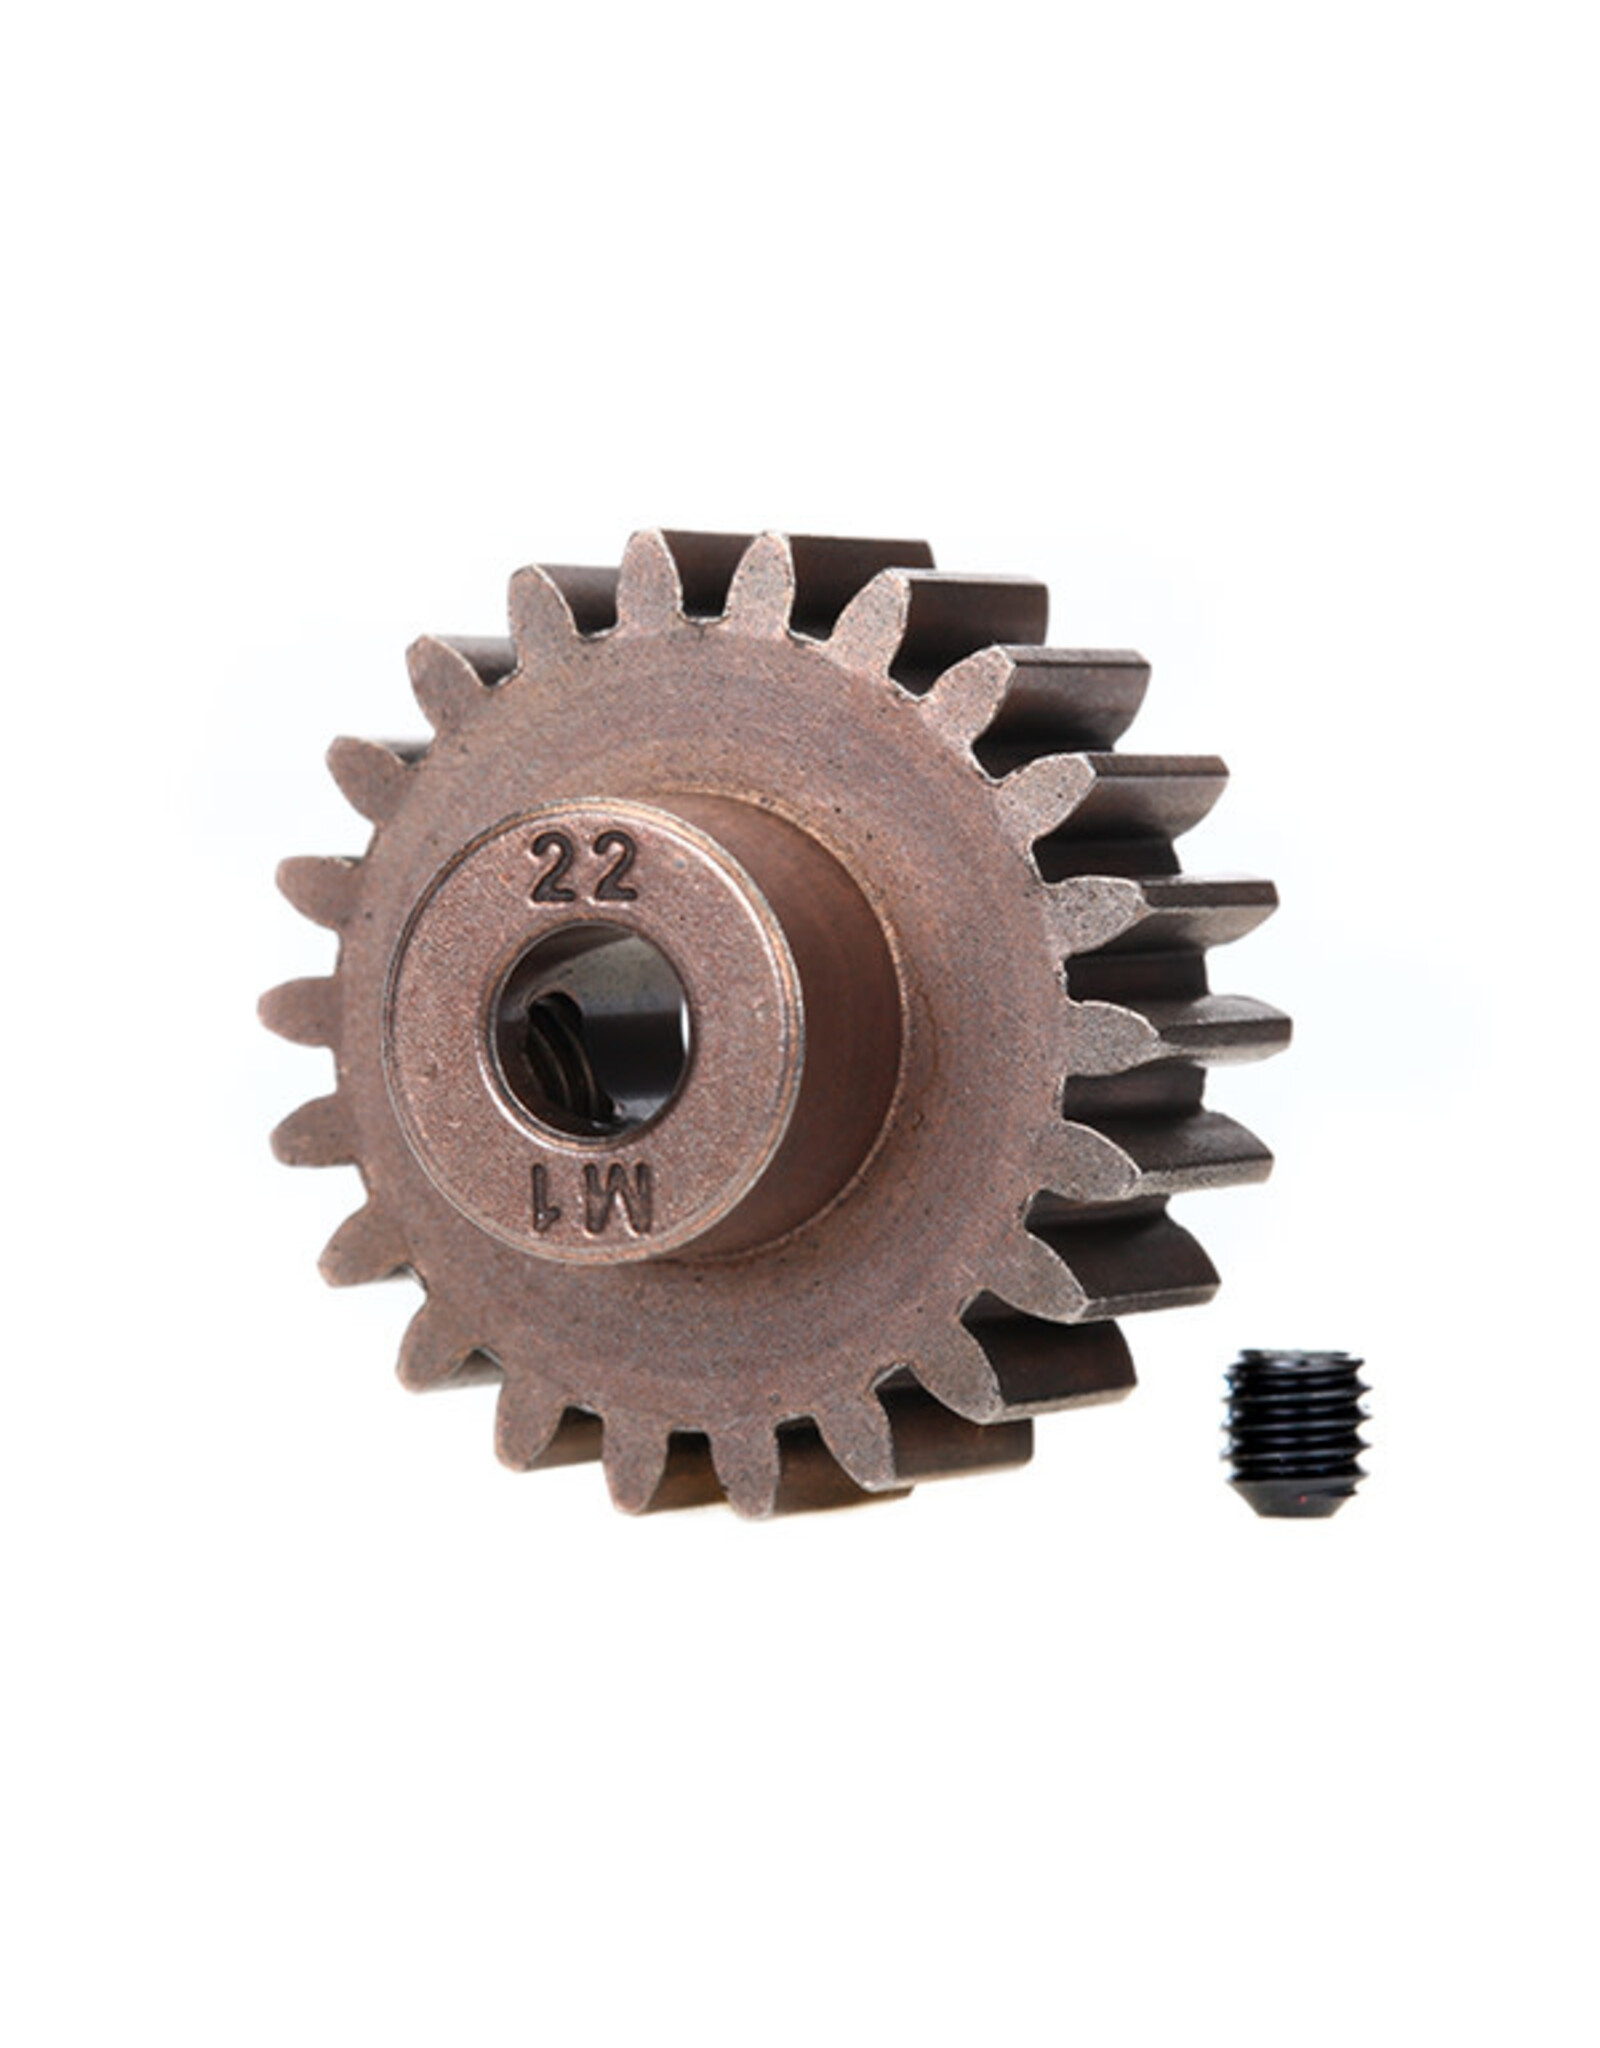 Traxxas traxxas Gear, 22-T pinion (1.0 metric pitch) (fits 5mm shaft)/ set screw (for use only with steel spur gears)